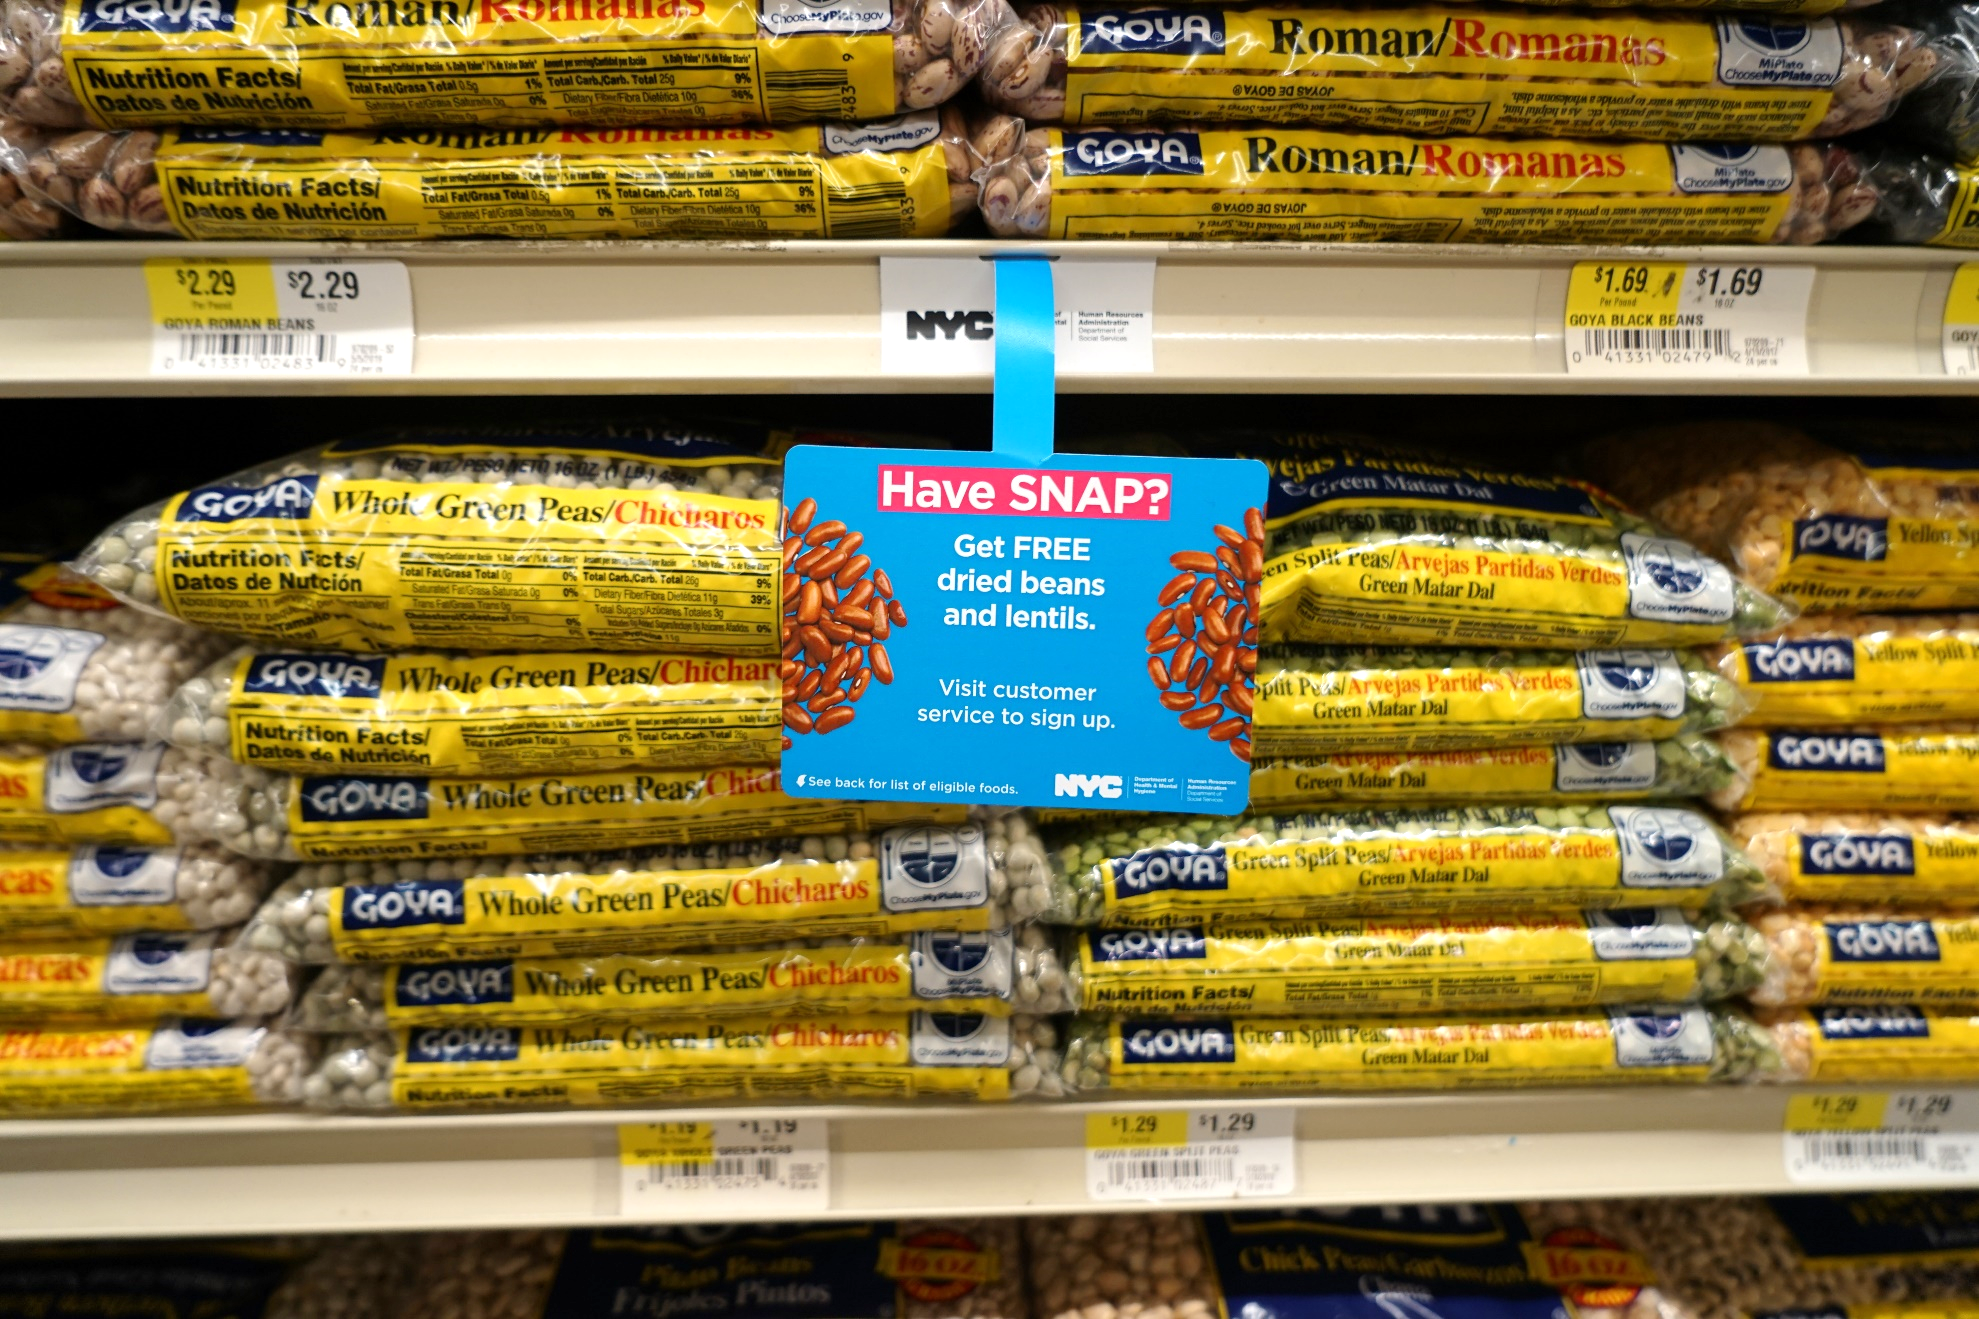 Several bags of goya beans on a grocery store shelf.